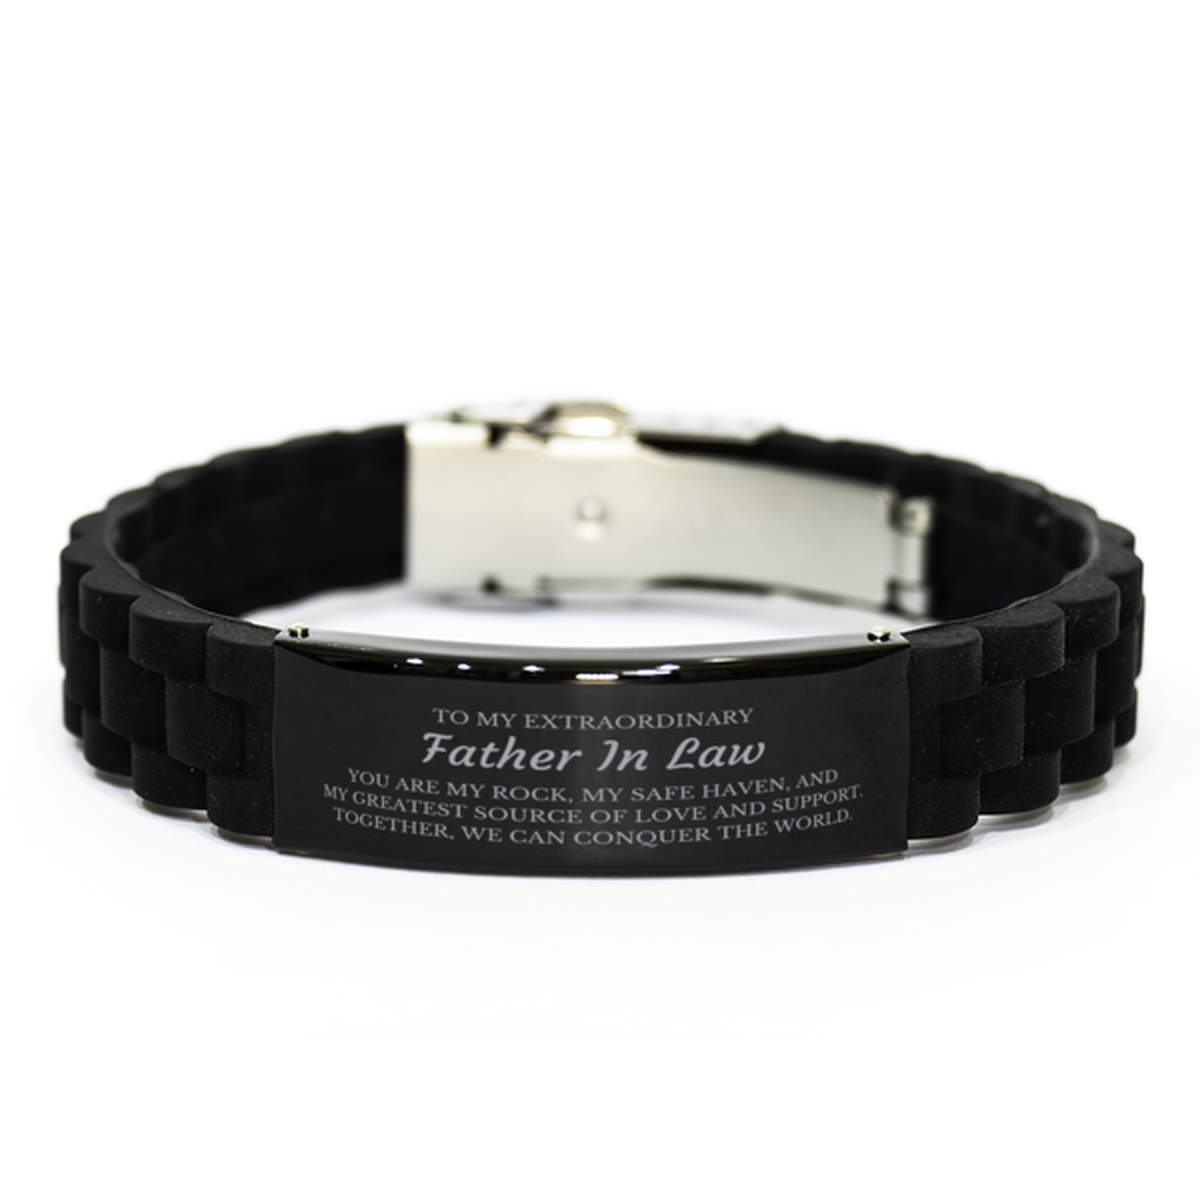 To My Extraordinary Father In Law Gifts, Together, we can conquer the world, Birthday Black Glidelock Clasp Bracelet For Father In Law, Christmas Gifts For Father In Law